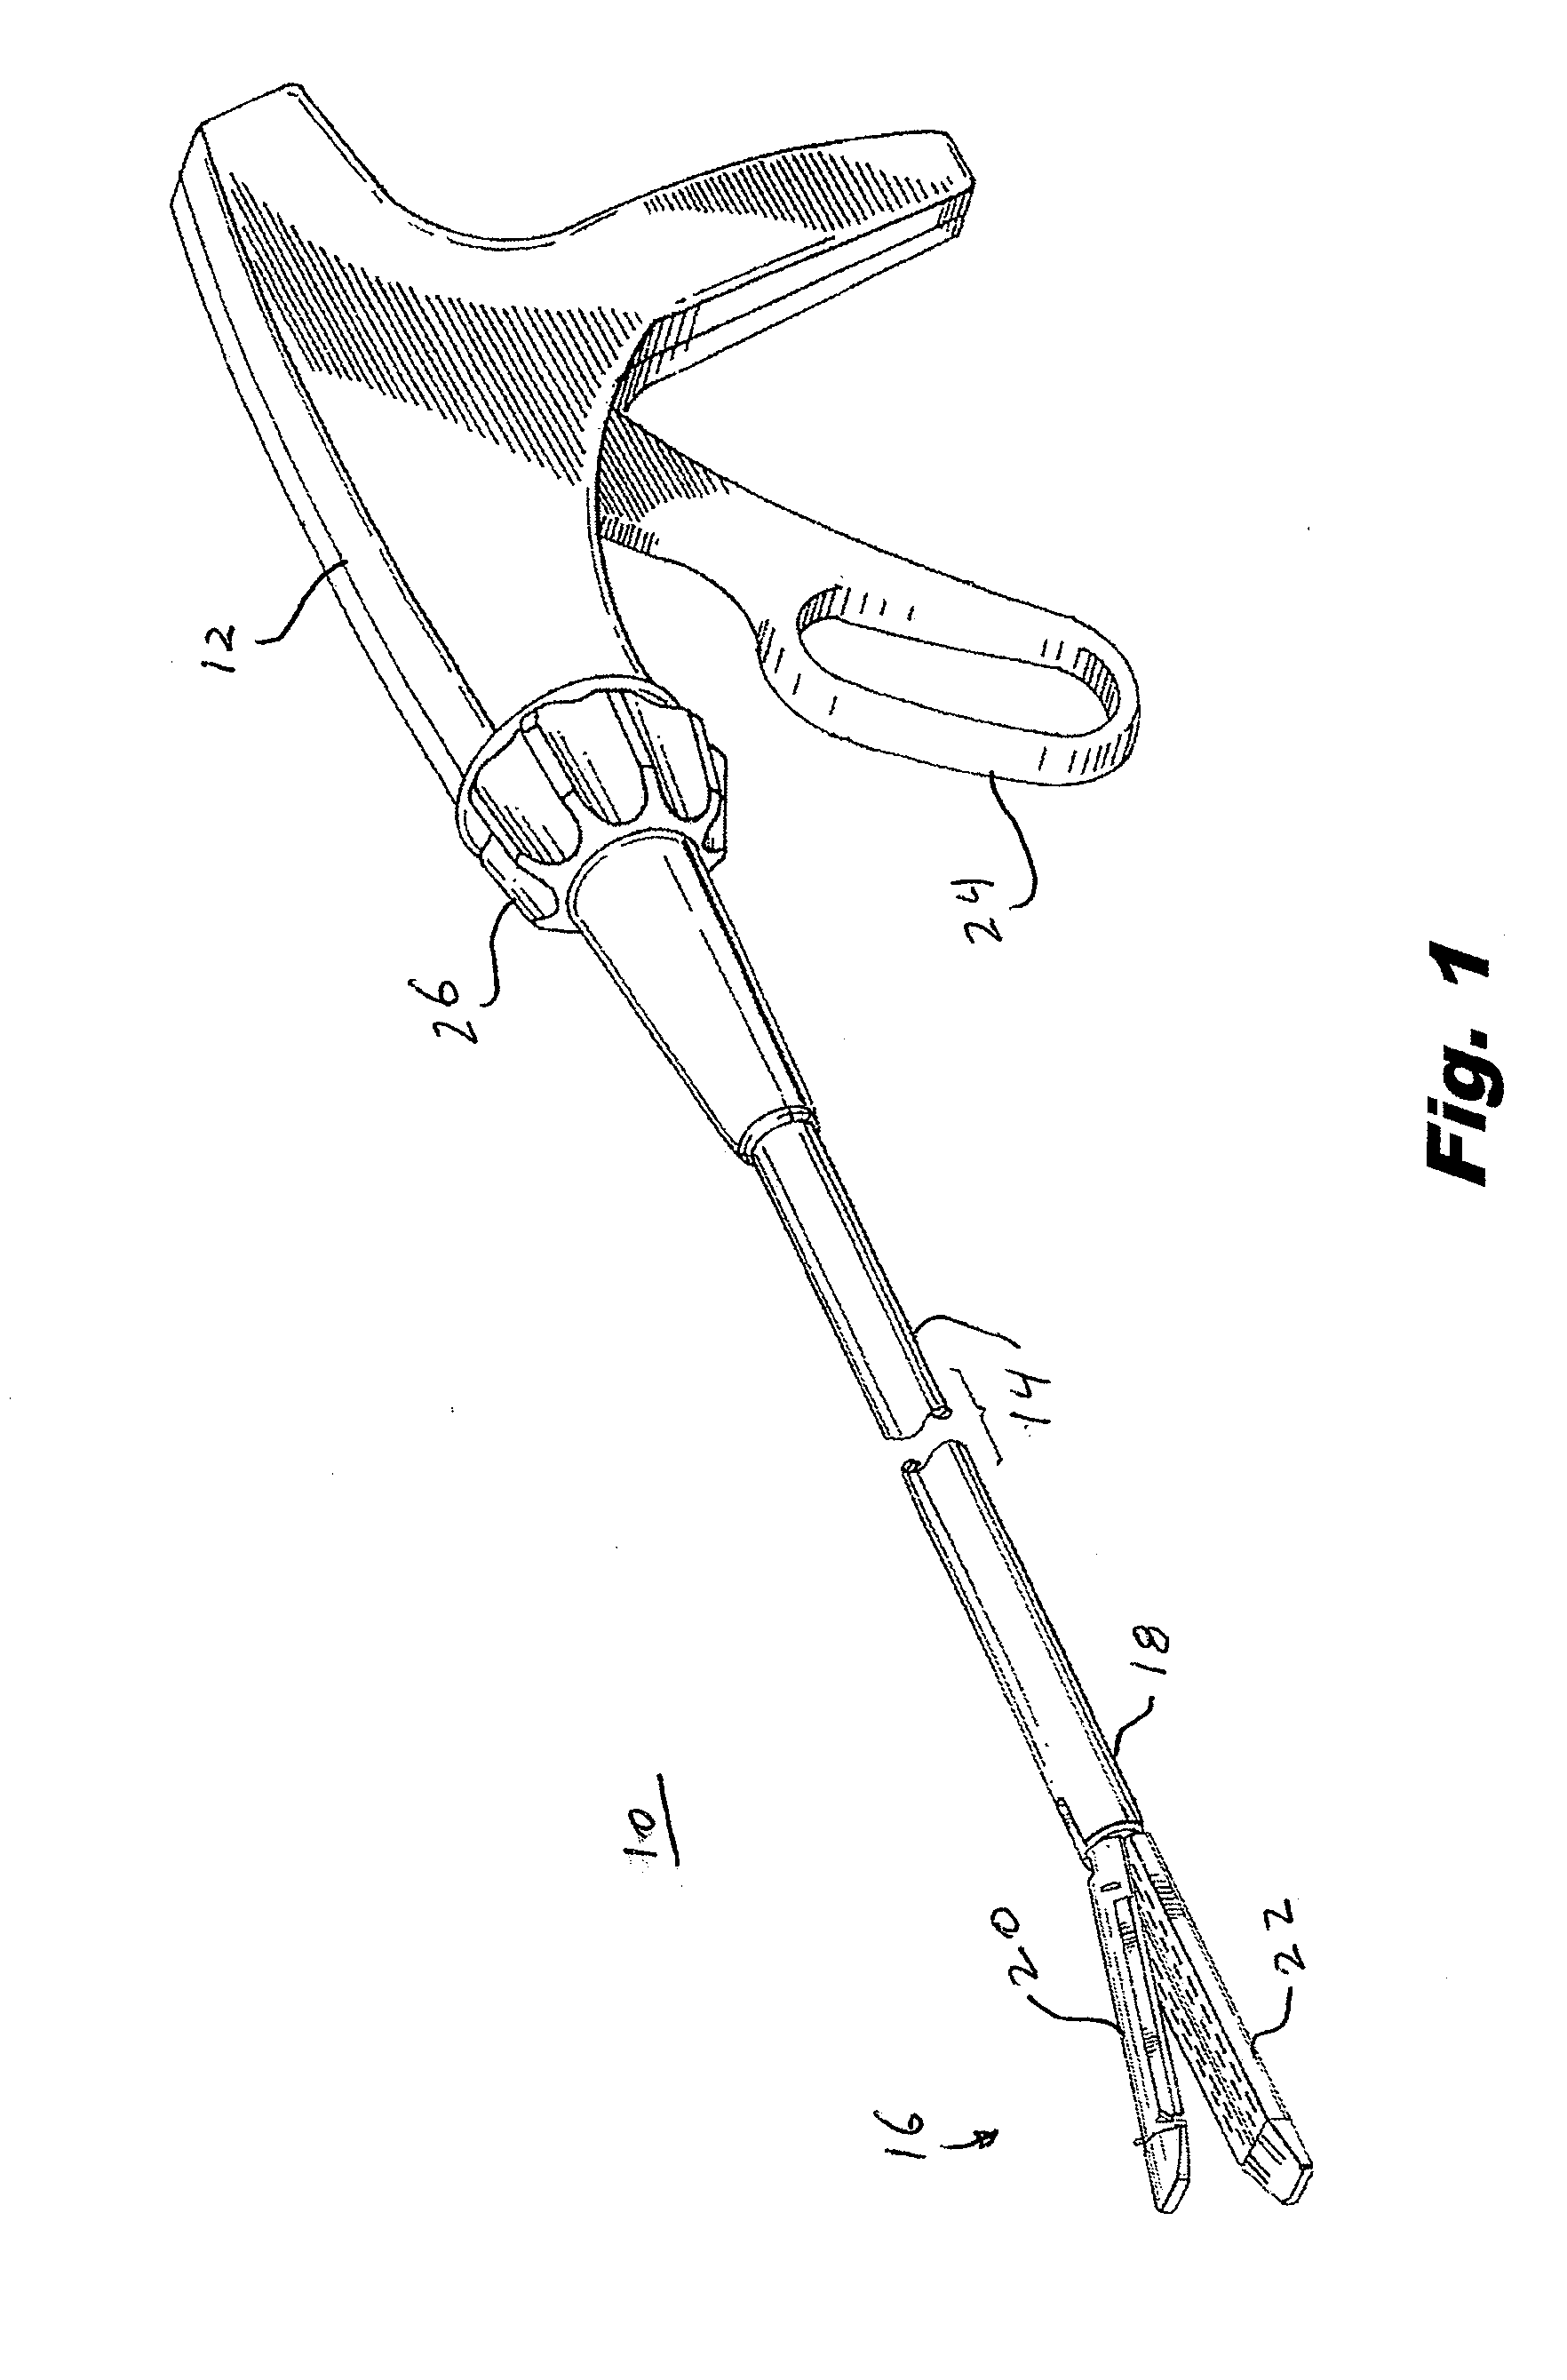 Crimp And Release Of Suture Holding Buttress Material